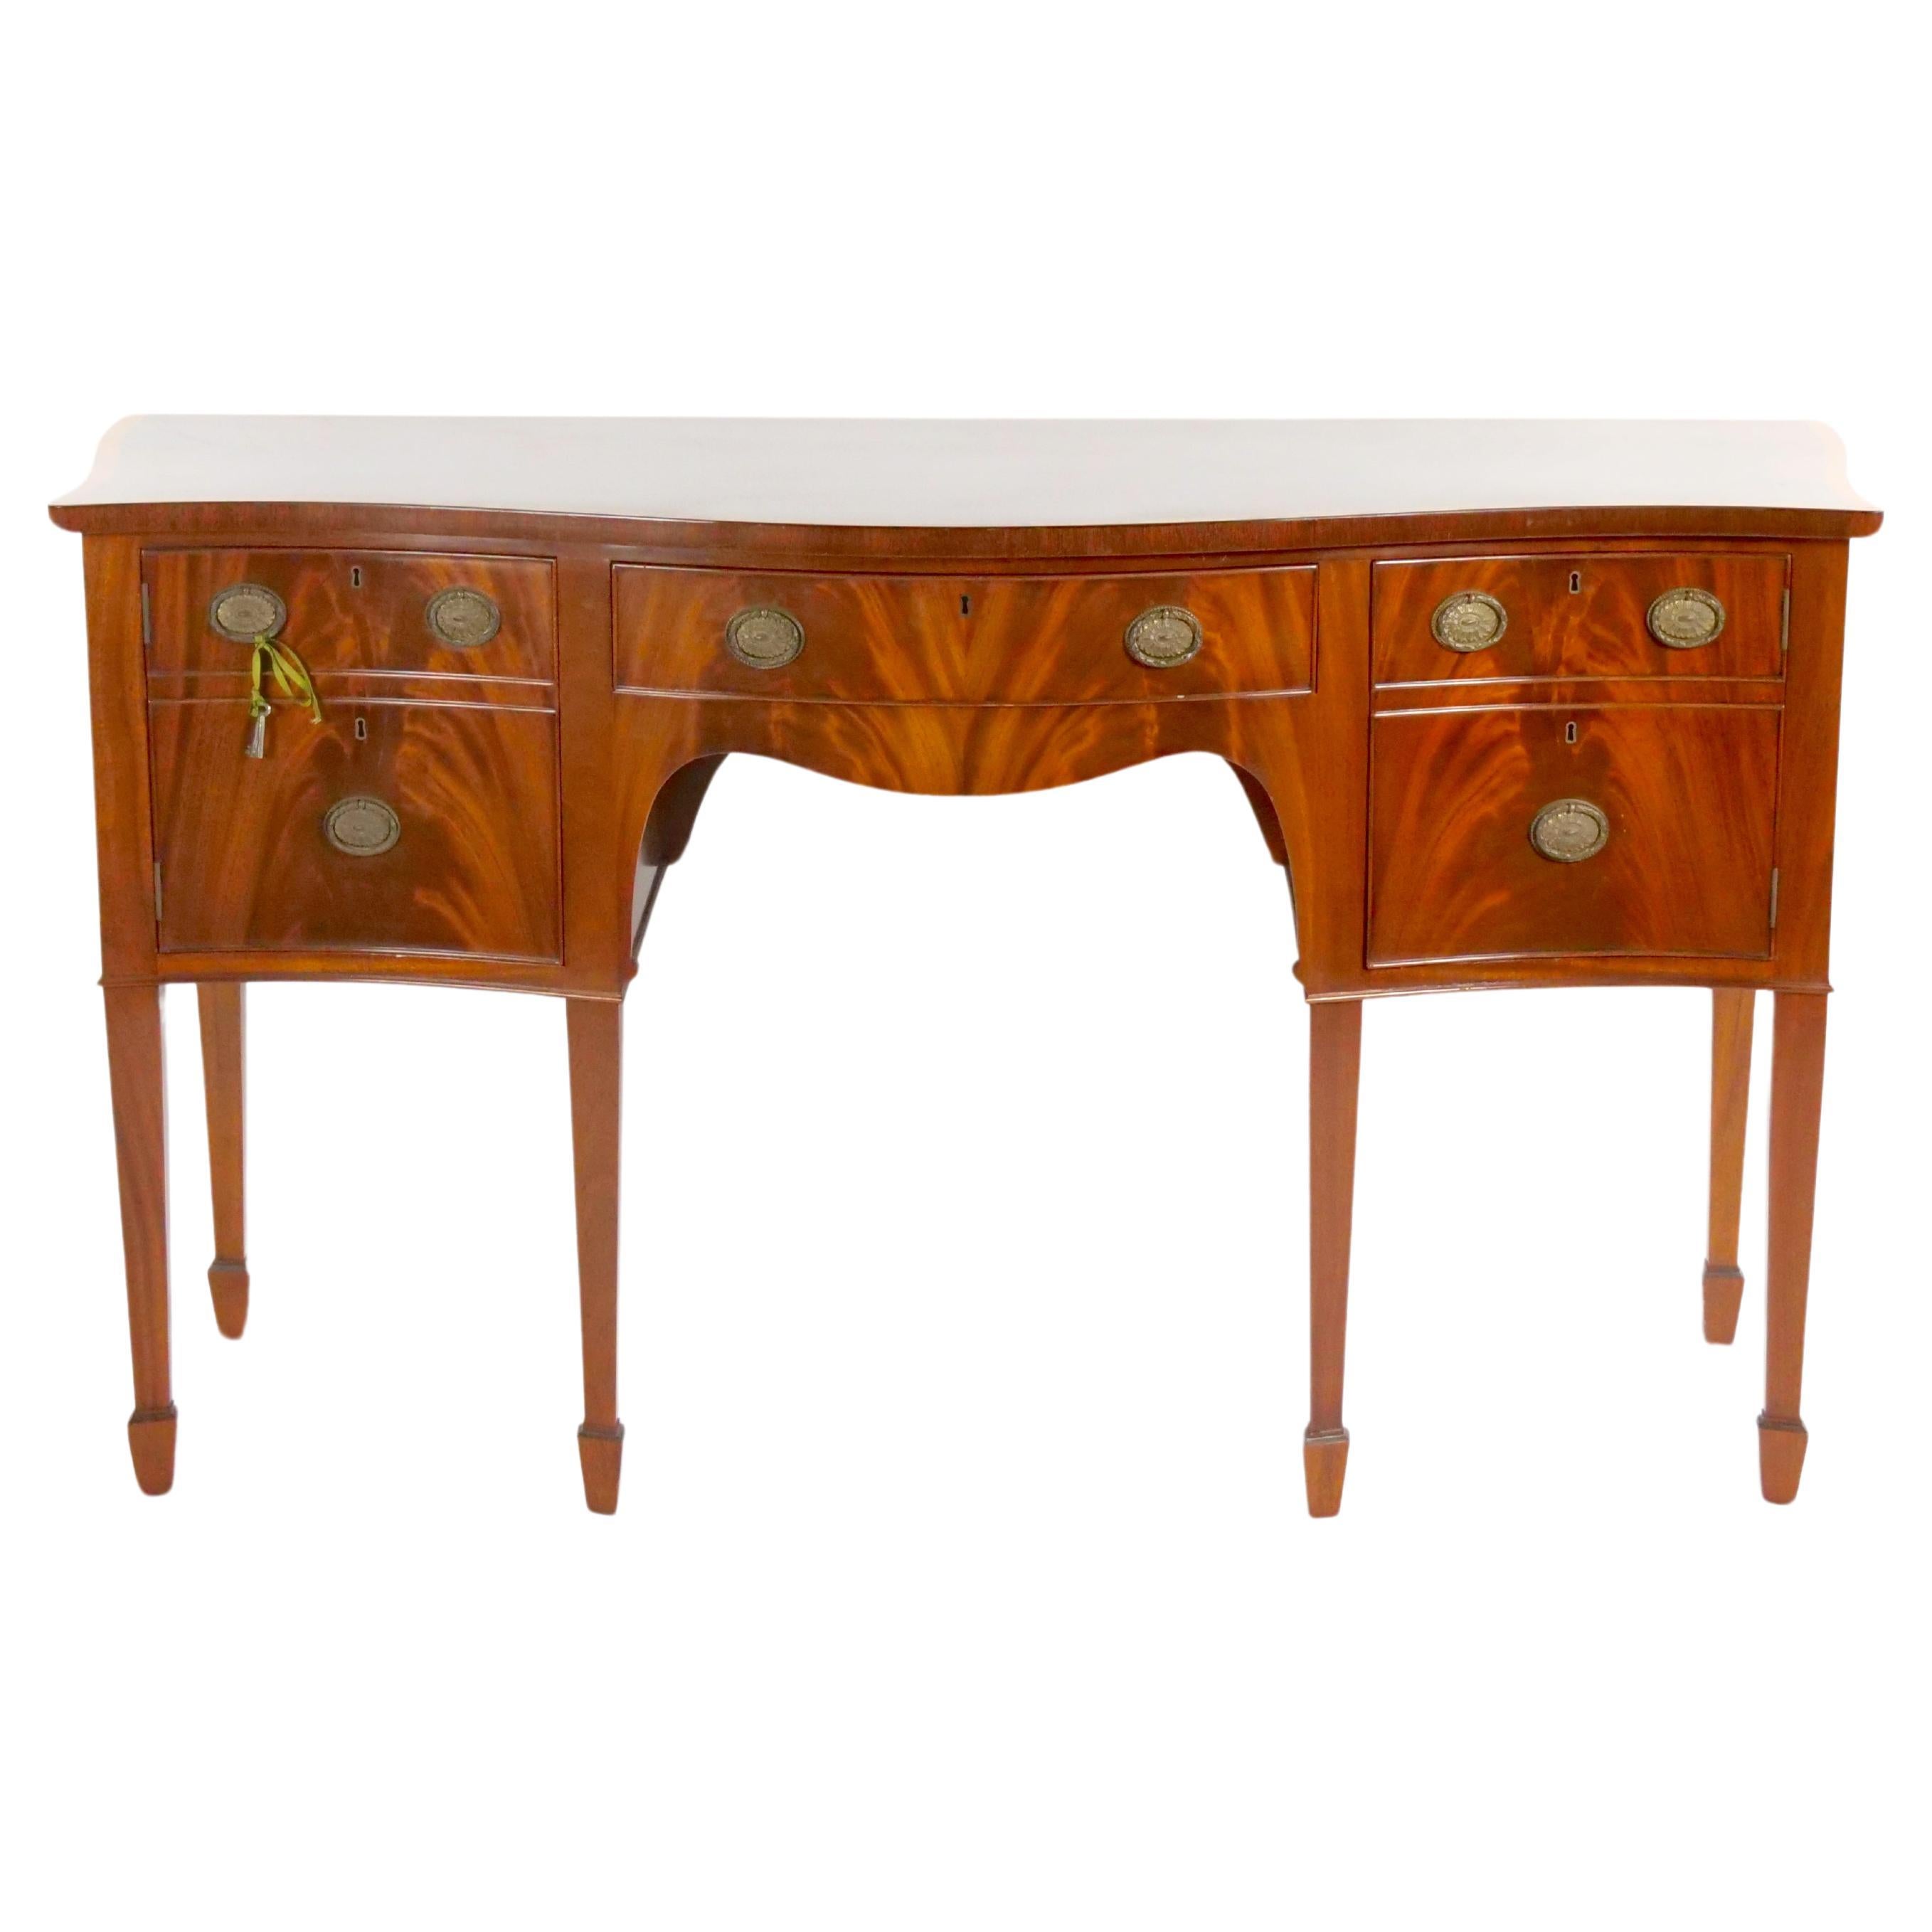 Early 20th Century George III Flame Mahogany Serpentine Sideboard / Server For Sale